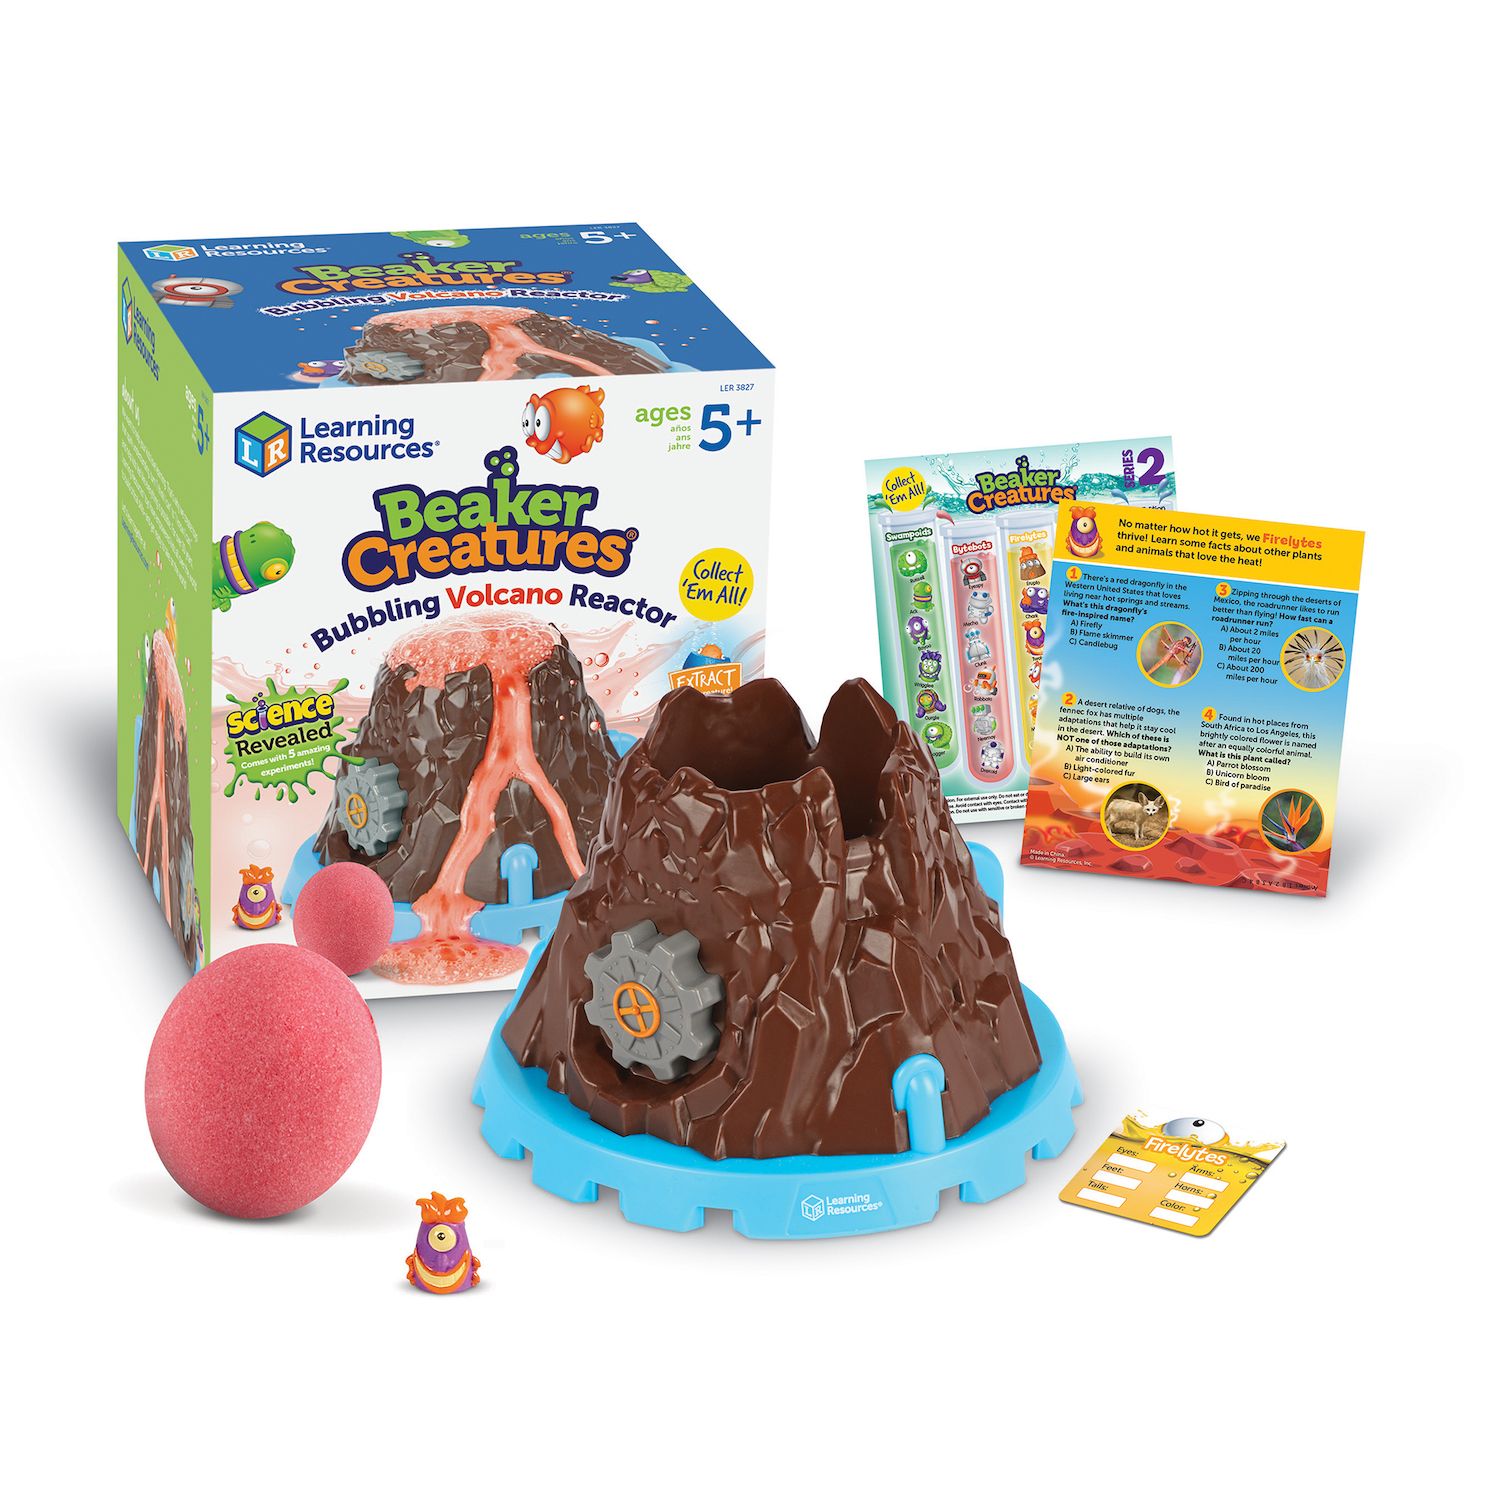 Image for Learning Resources Beaker Creatures Bubbling Volcano Reactor at Kohl's.